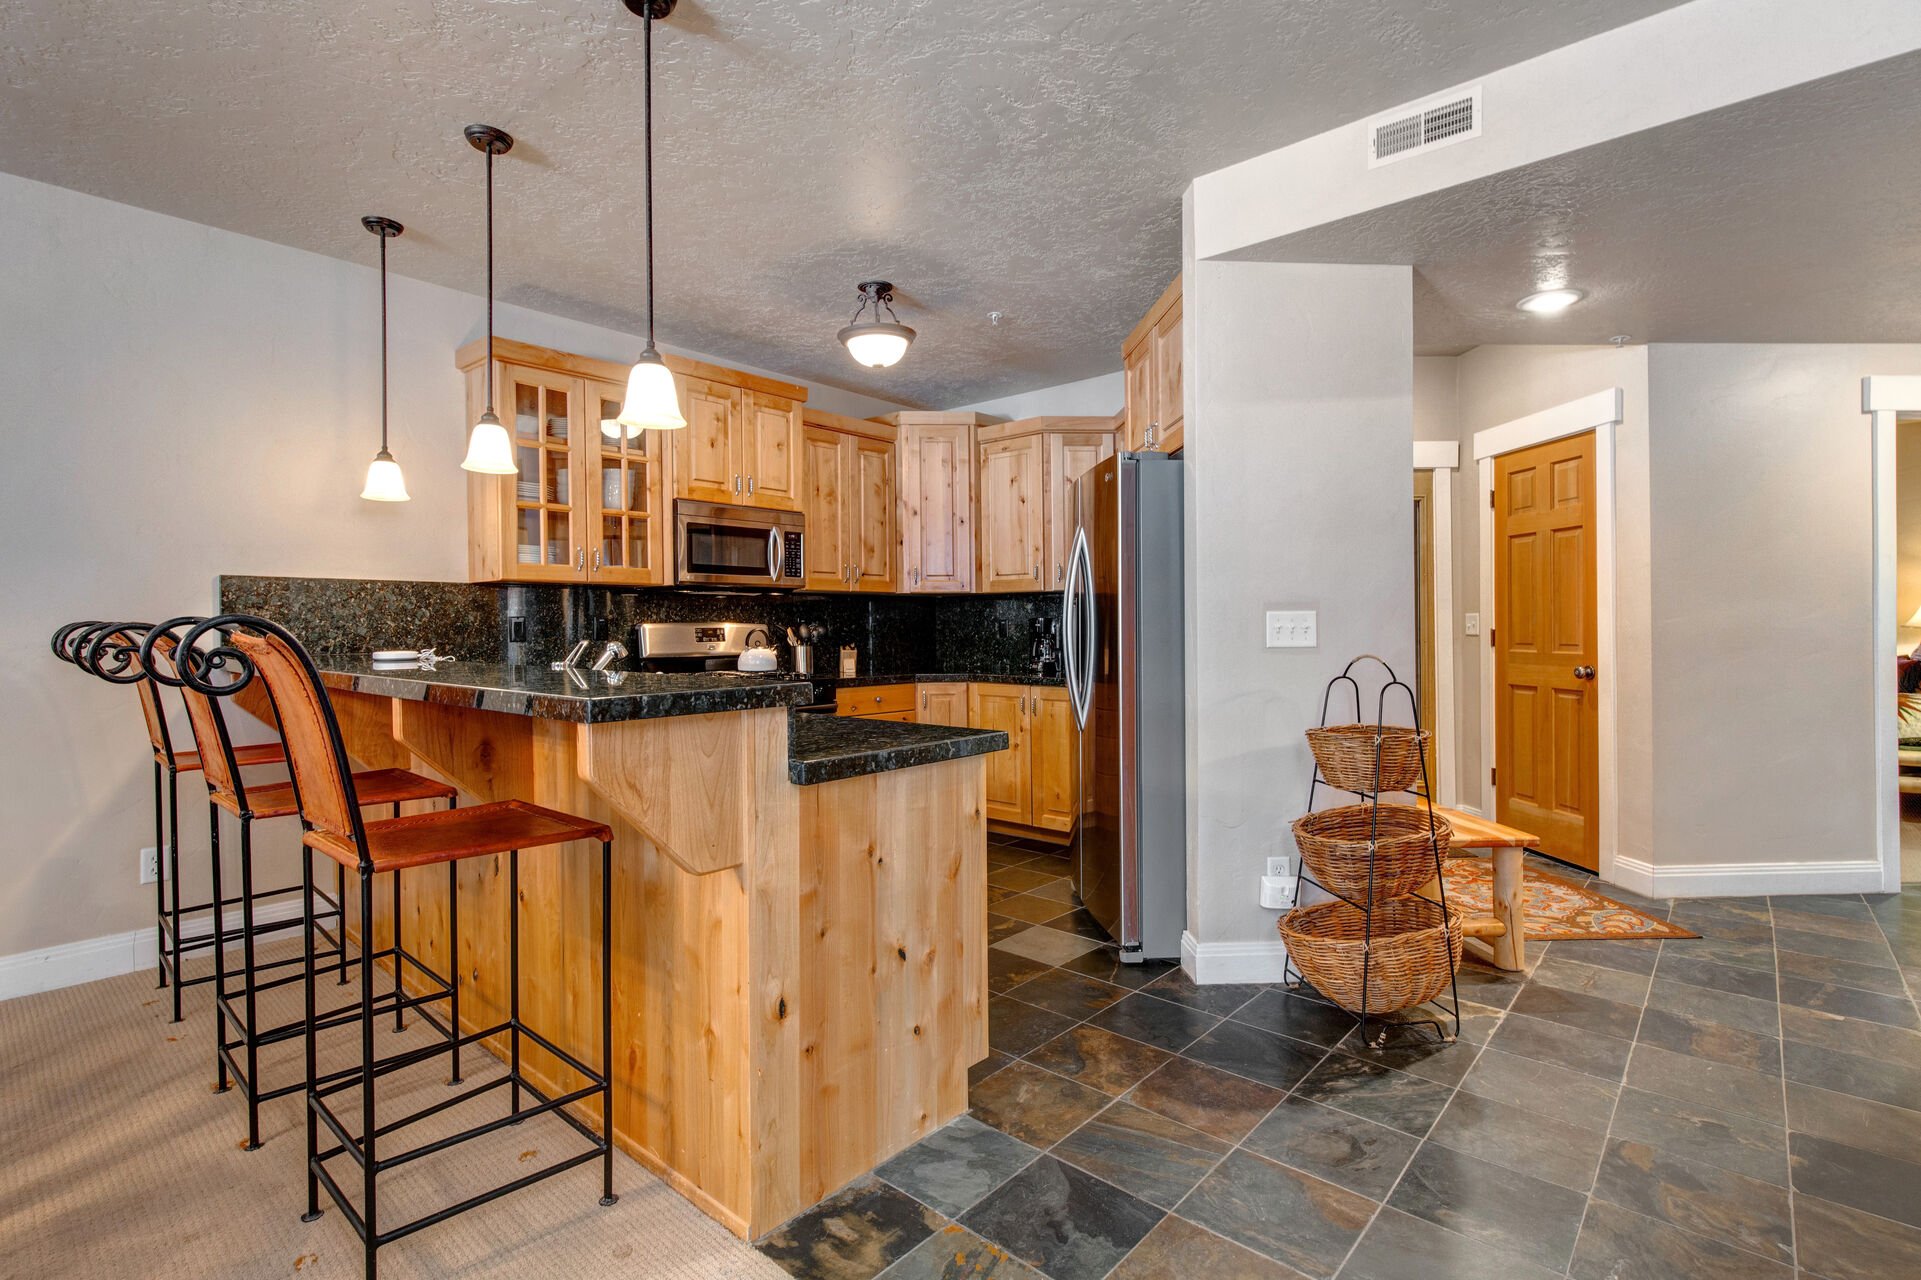 Fully Equipped Kitchen with gorgeous stone countertops, stainless steel LG appliances, built-in ice maker and bar seating for three